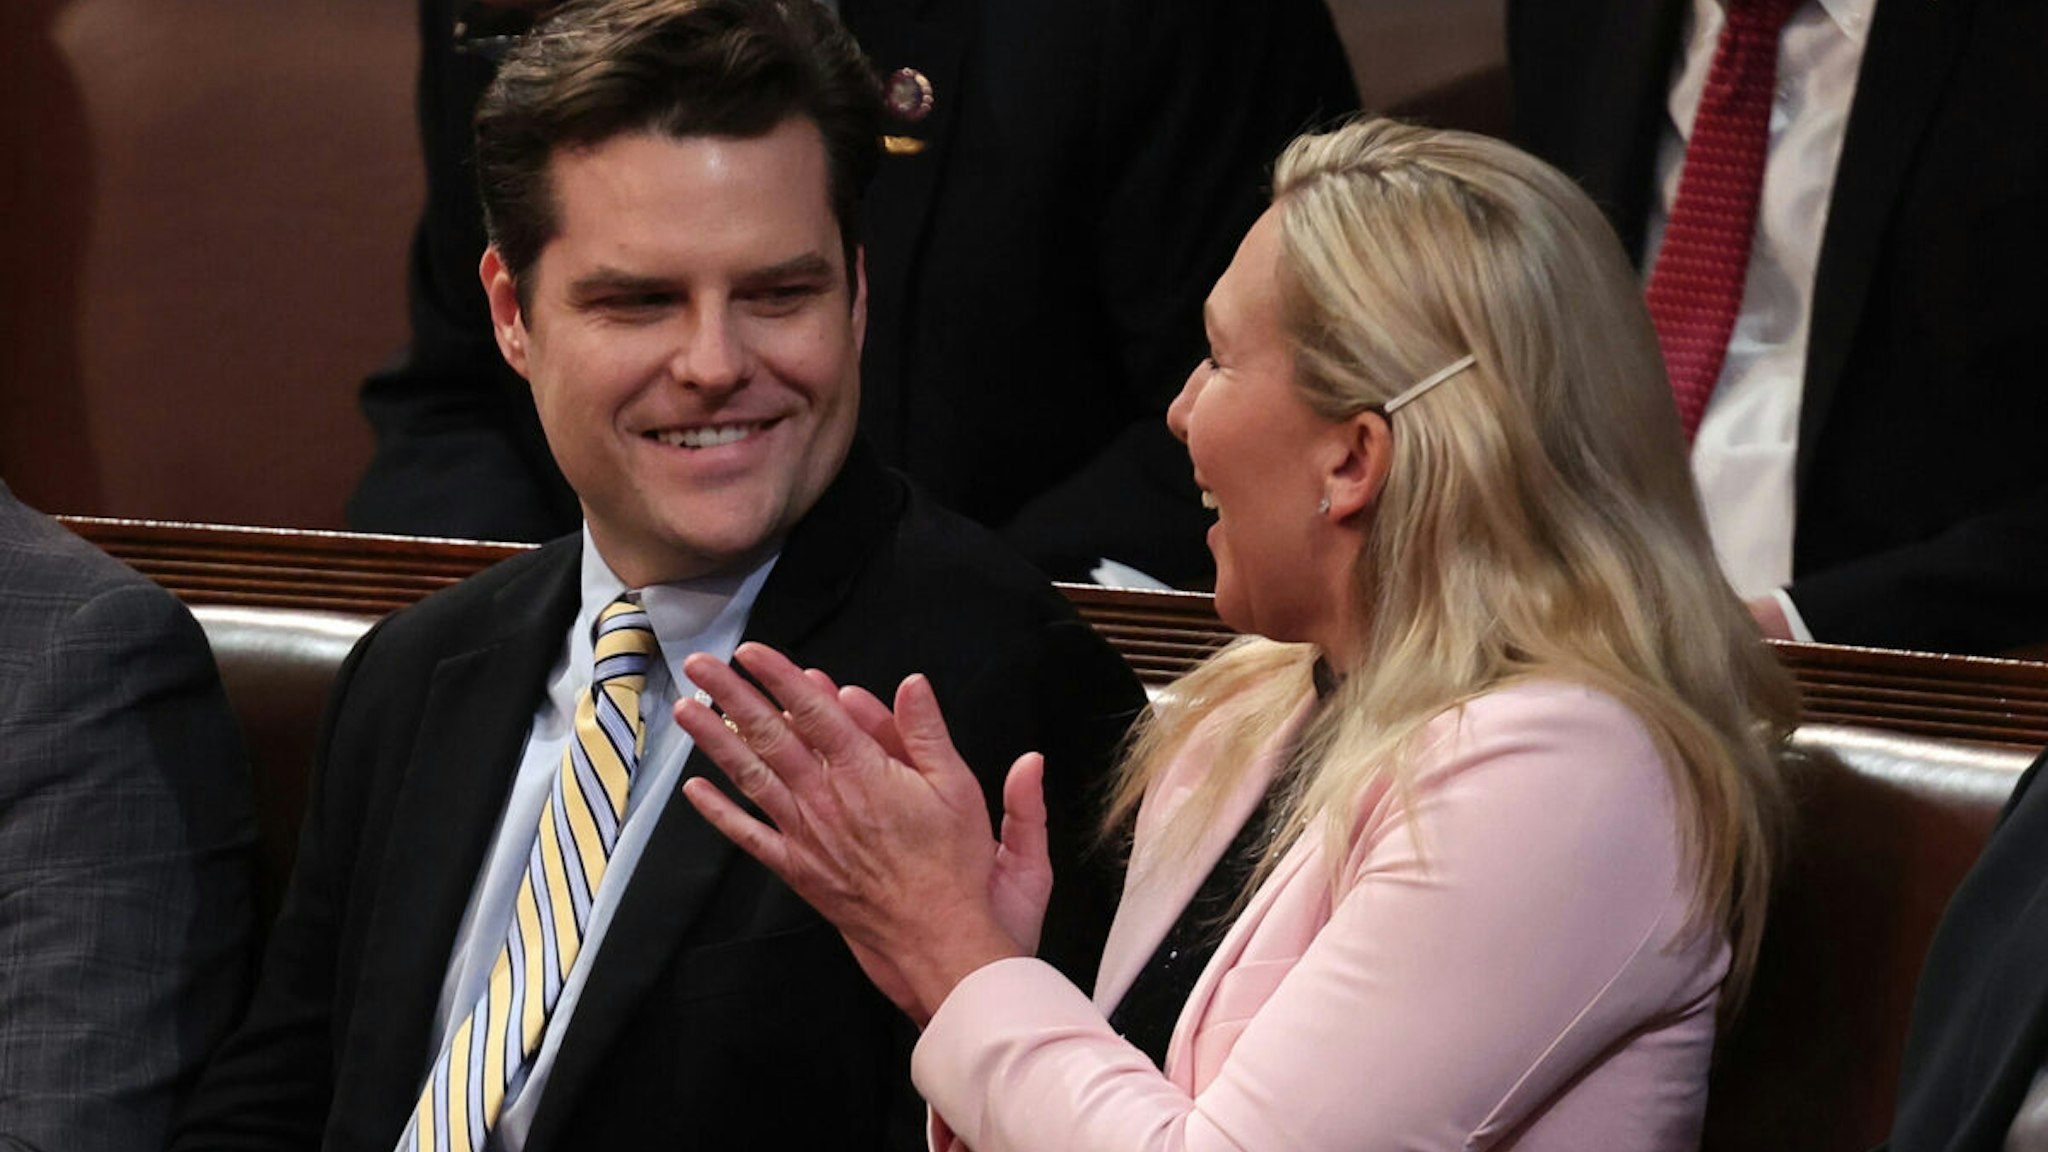 U.S. Rep.-elect Matt Gaetz (R-FL) (L) sits with Rep.-elect Marjorie Taylor Greene (R-GA) in the House Chamber during the third day of elections for Speaker of the House at the U.S. Capitol Building on January 05, 2023 in Washington, DC.